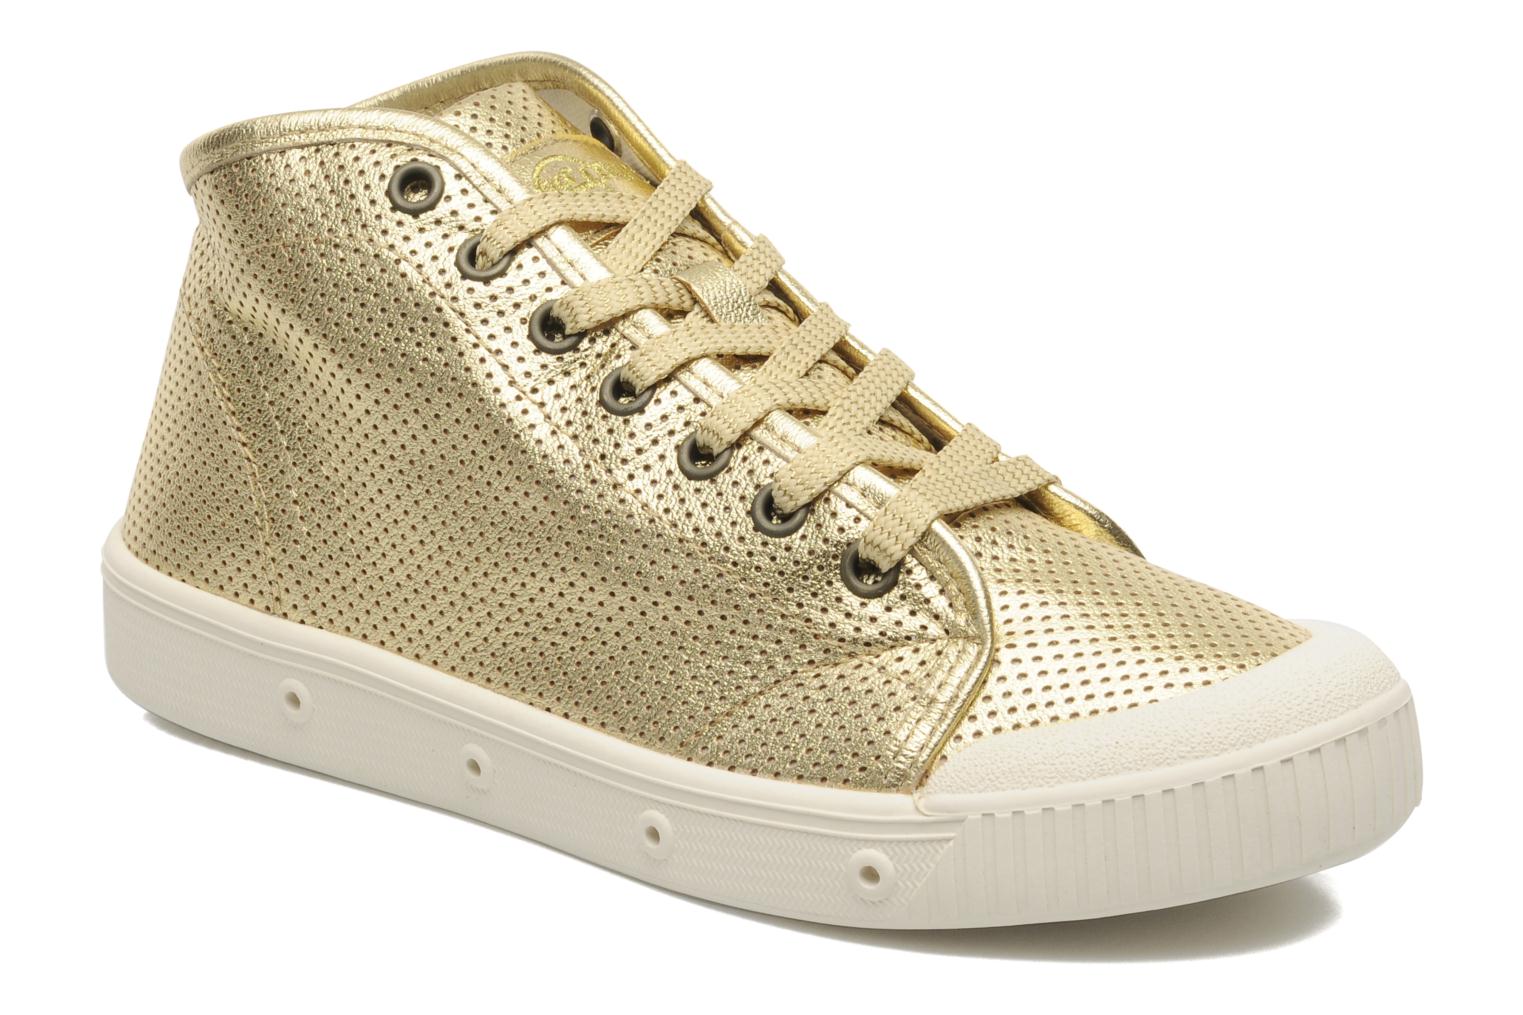 Foto Tenis moda Spring Court B2 punch leather Mujer